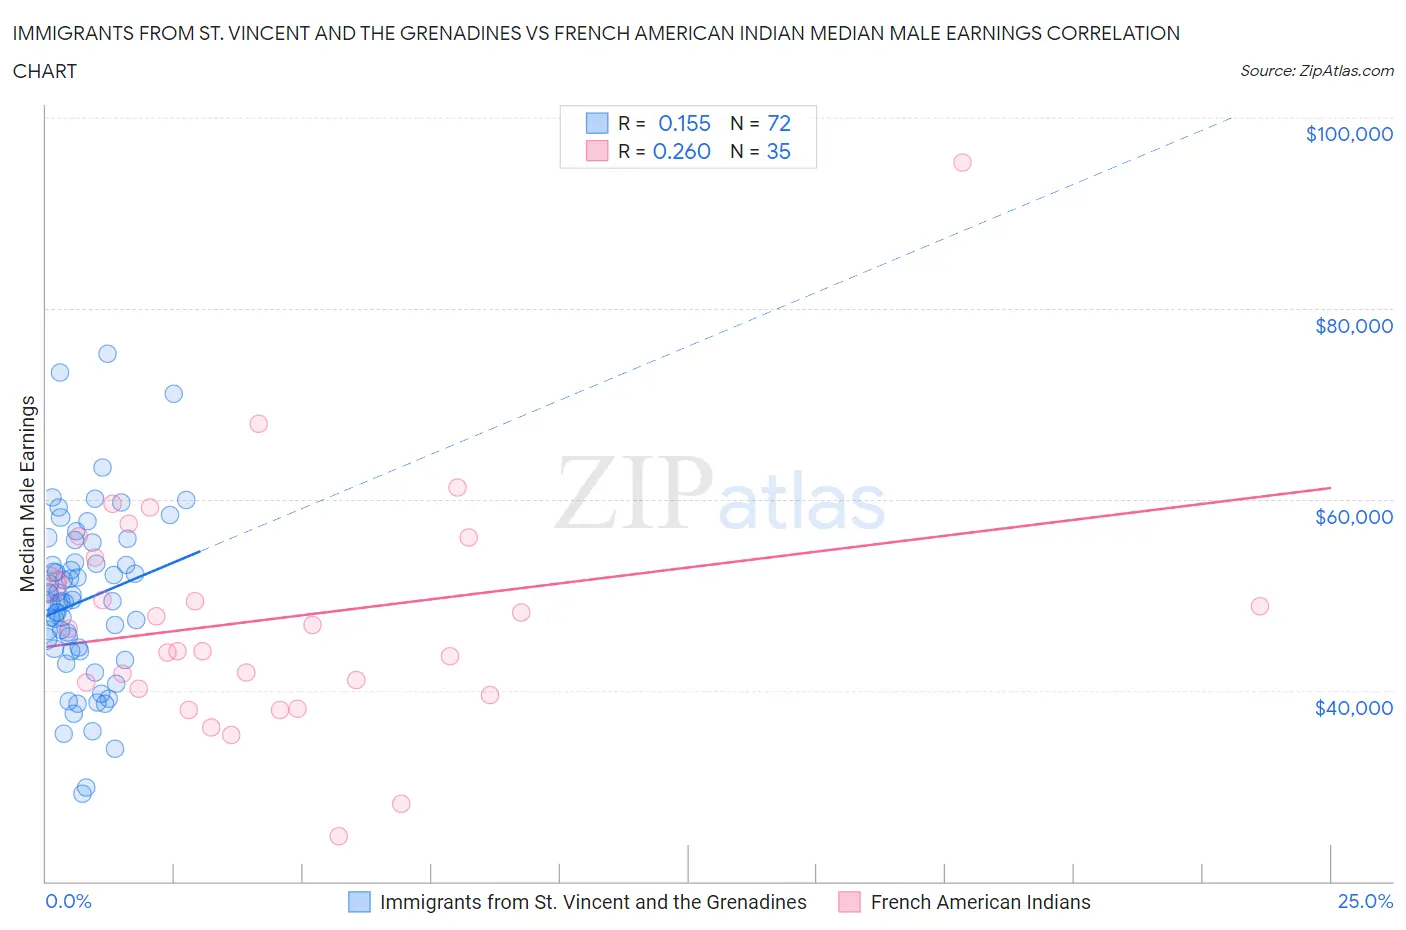 Immigrants from St. Vincent and the Grenadines vs French American Indian Median Male Earnings